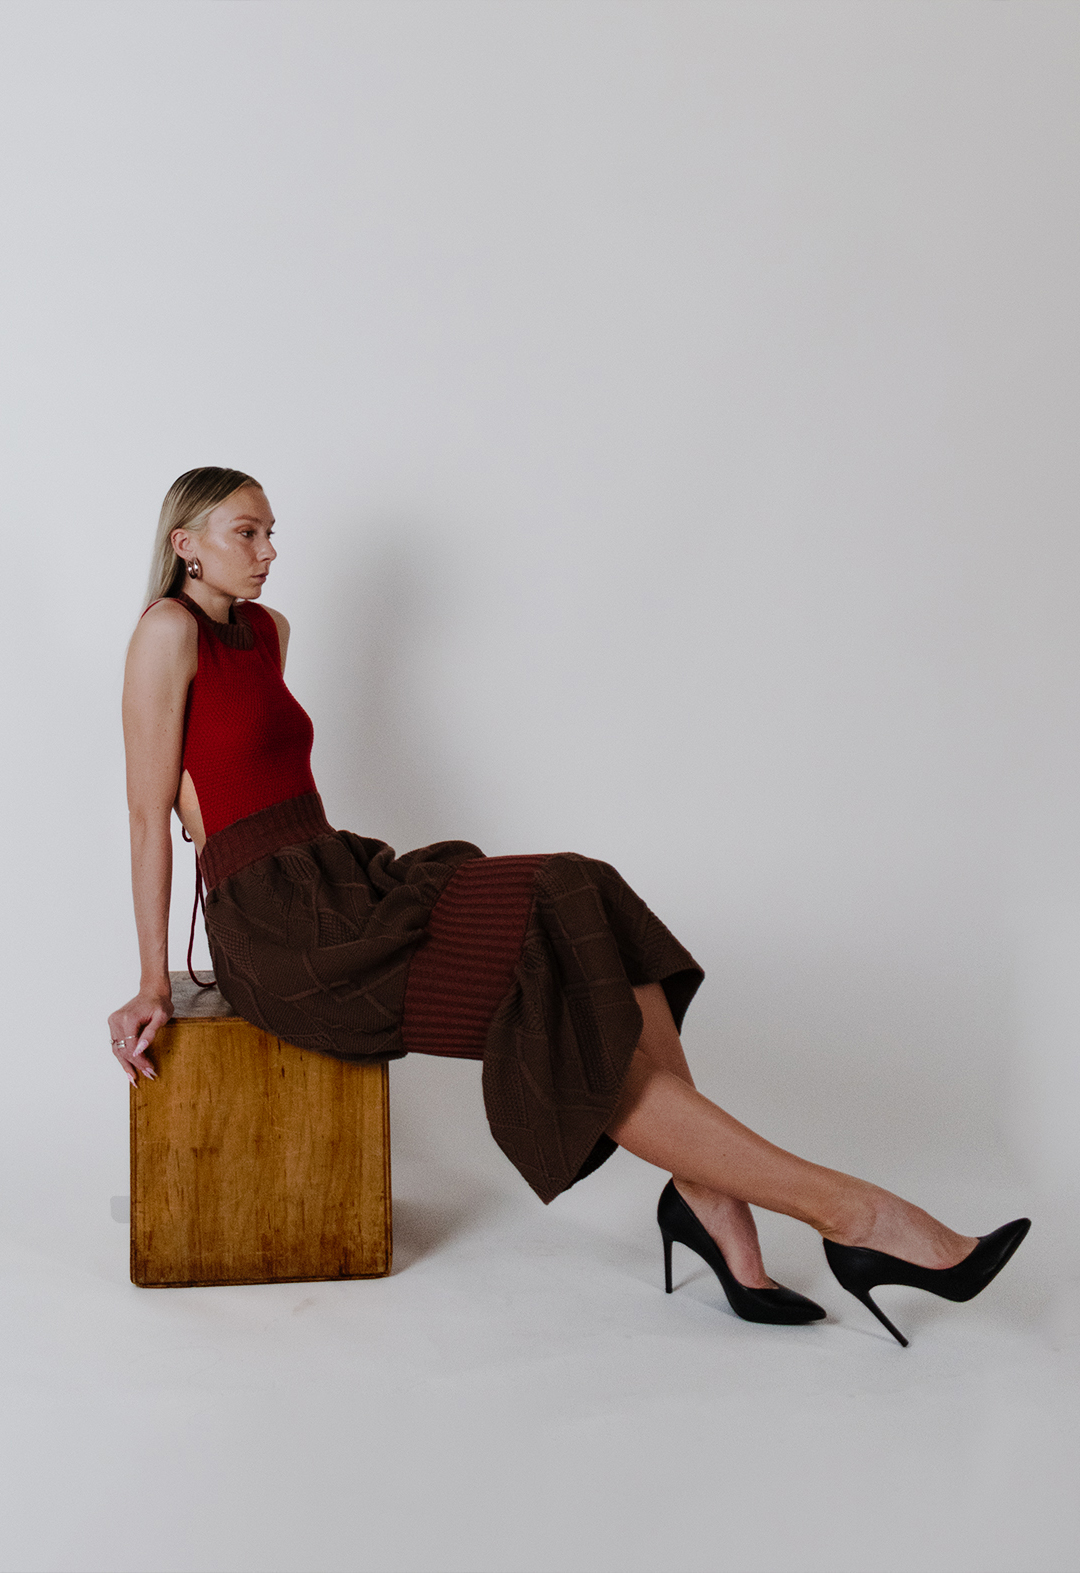 The same dress is displayed with a white background. This is a side-view photo of the model, who is sitting on a wooden box with her legs extended to the side. The skirt is beautifully draped across her legs. She is looking toward the side, with her face looking away from the camera and her hand propped behind her at the edge of the wooden box. 